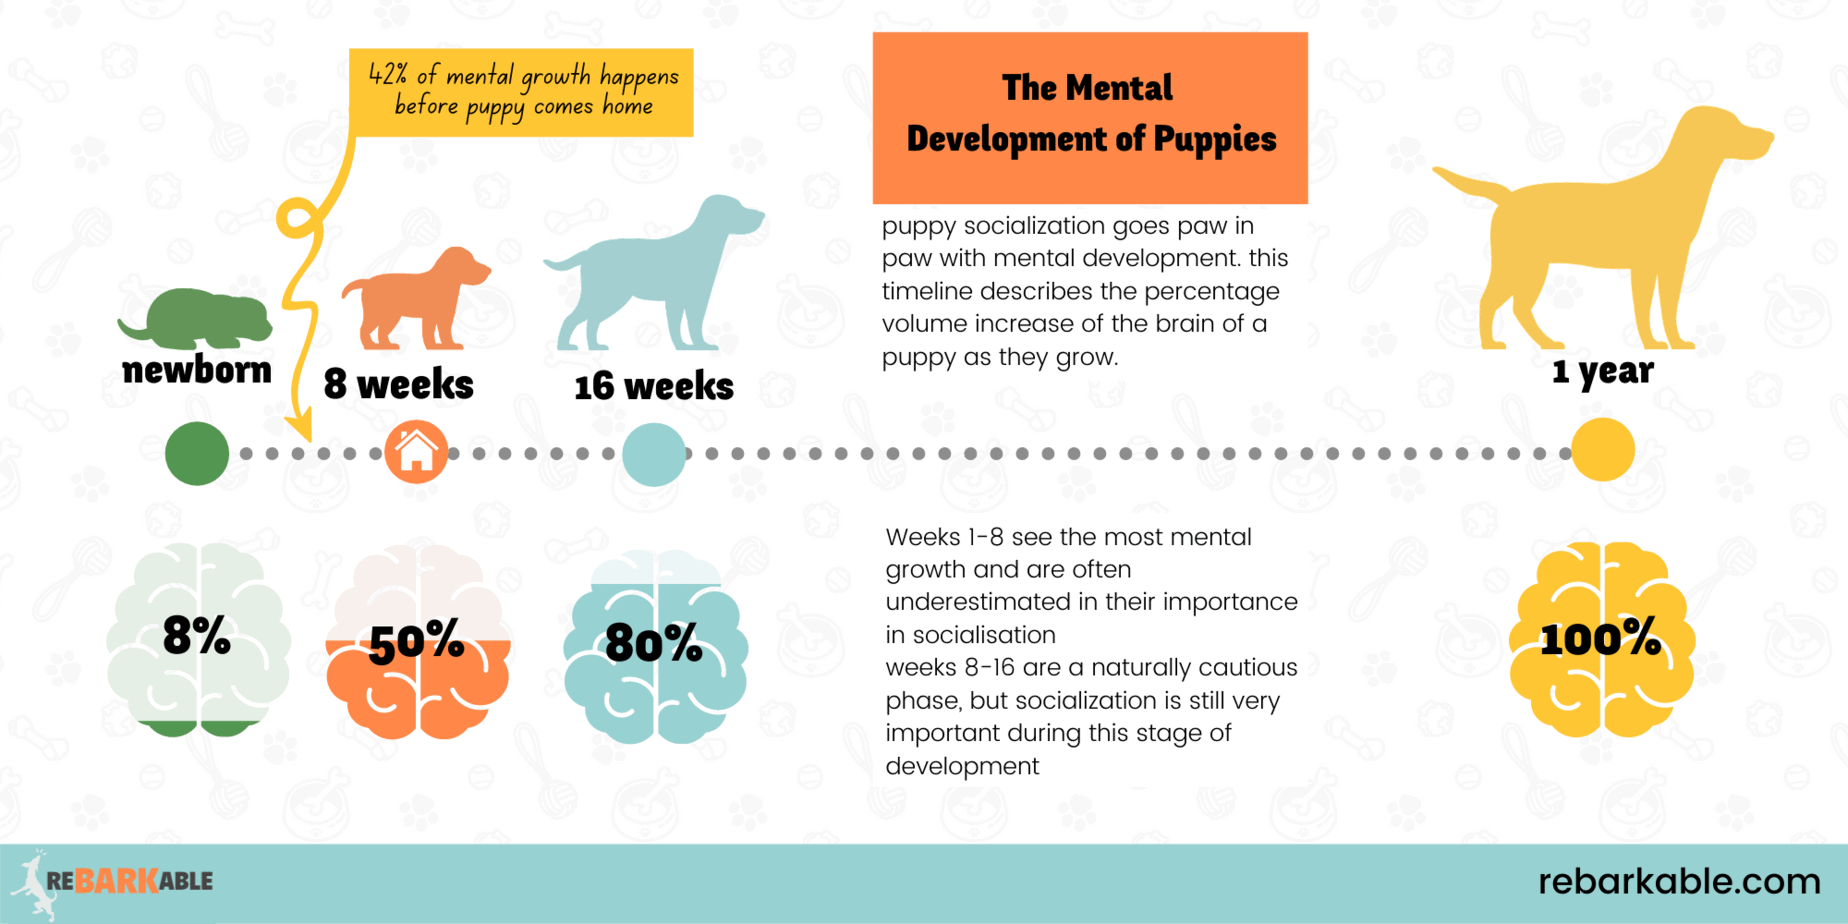 Rebarkable's Mental Development Of Puppies and it's pertinents to puppy socialization socialize